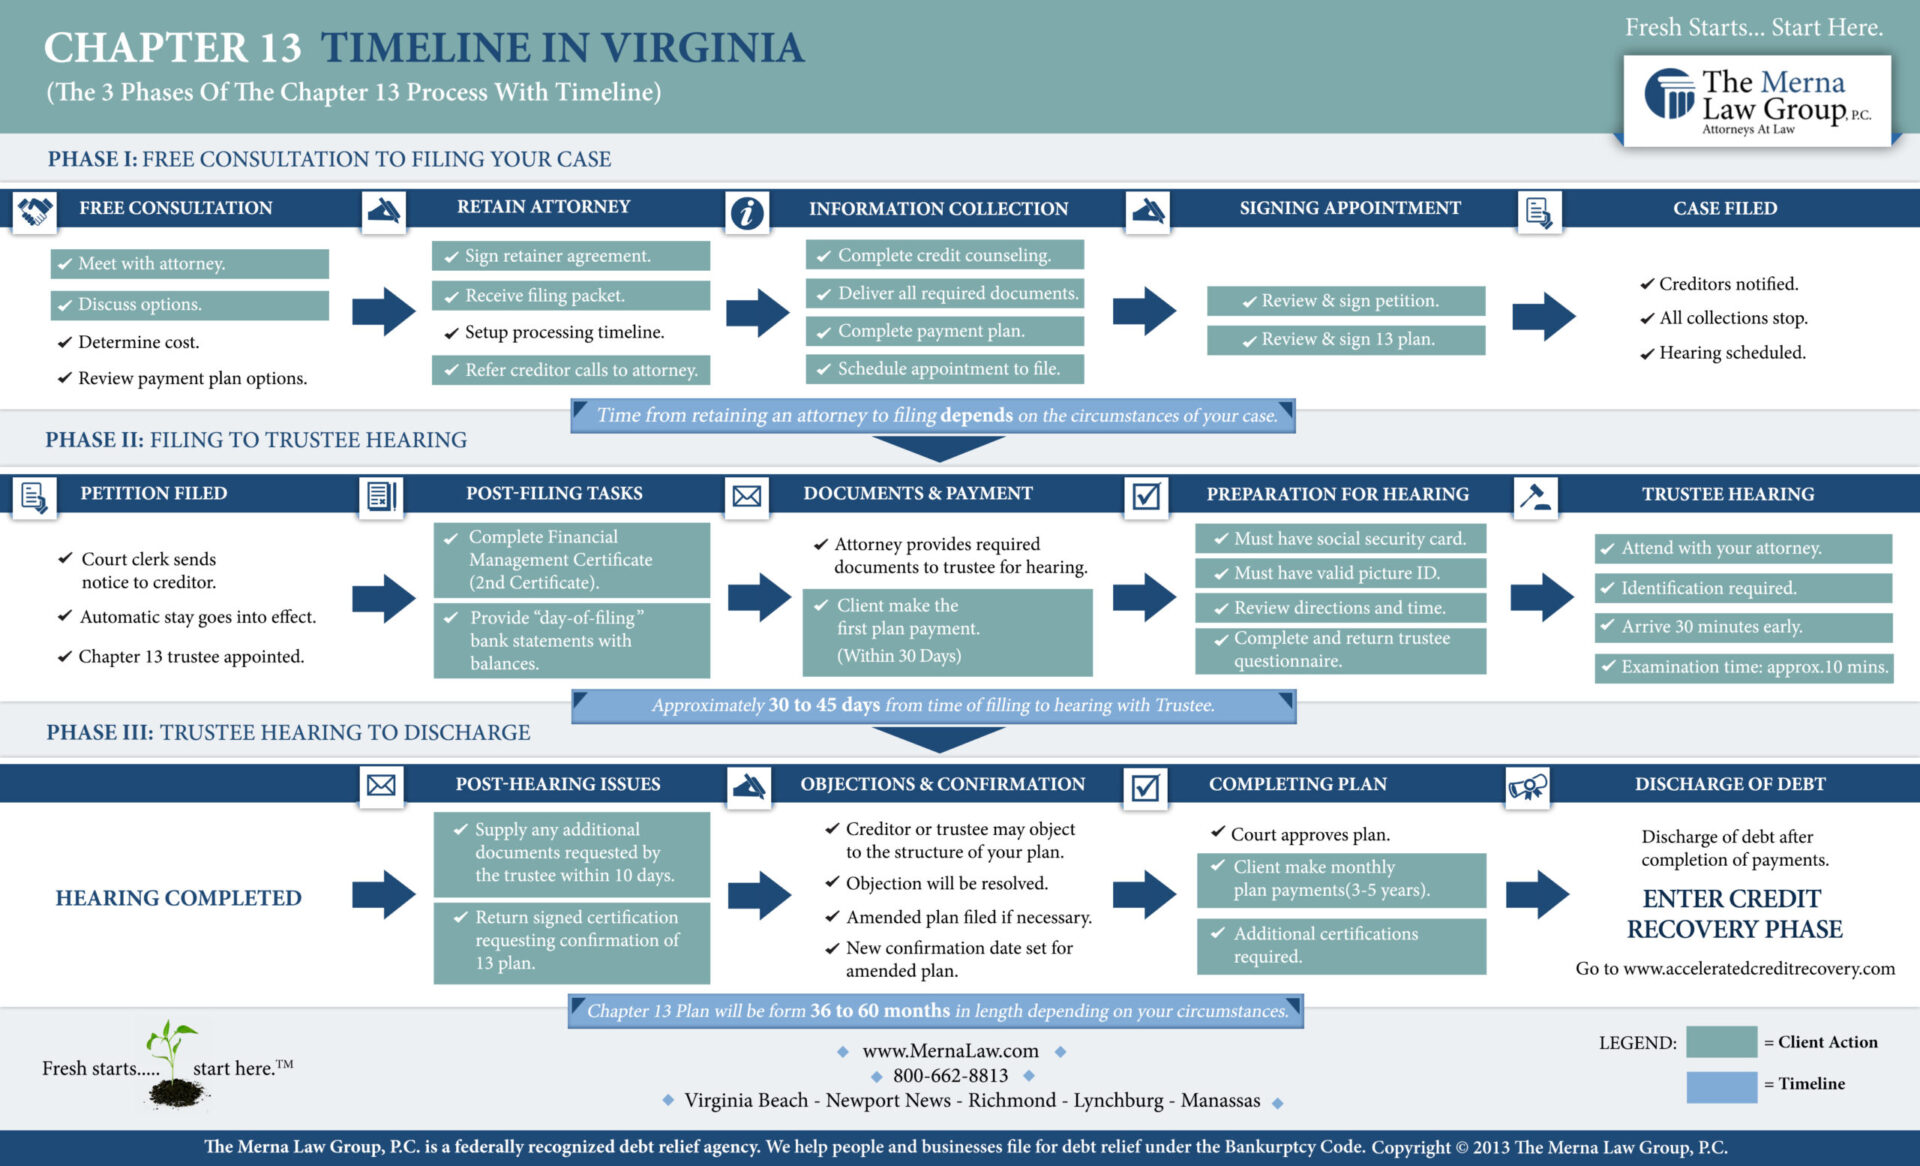 Chapter 13 bankruptcy Infographic, chapter 13 process, chapter 13 timeline, Virginia Beach, Richmond, Newport News, Hampton, Chesterfield, Henrico, Norfolk, Portsmouth, Chesapeake